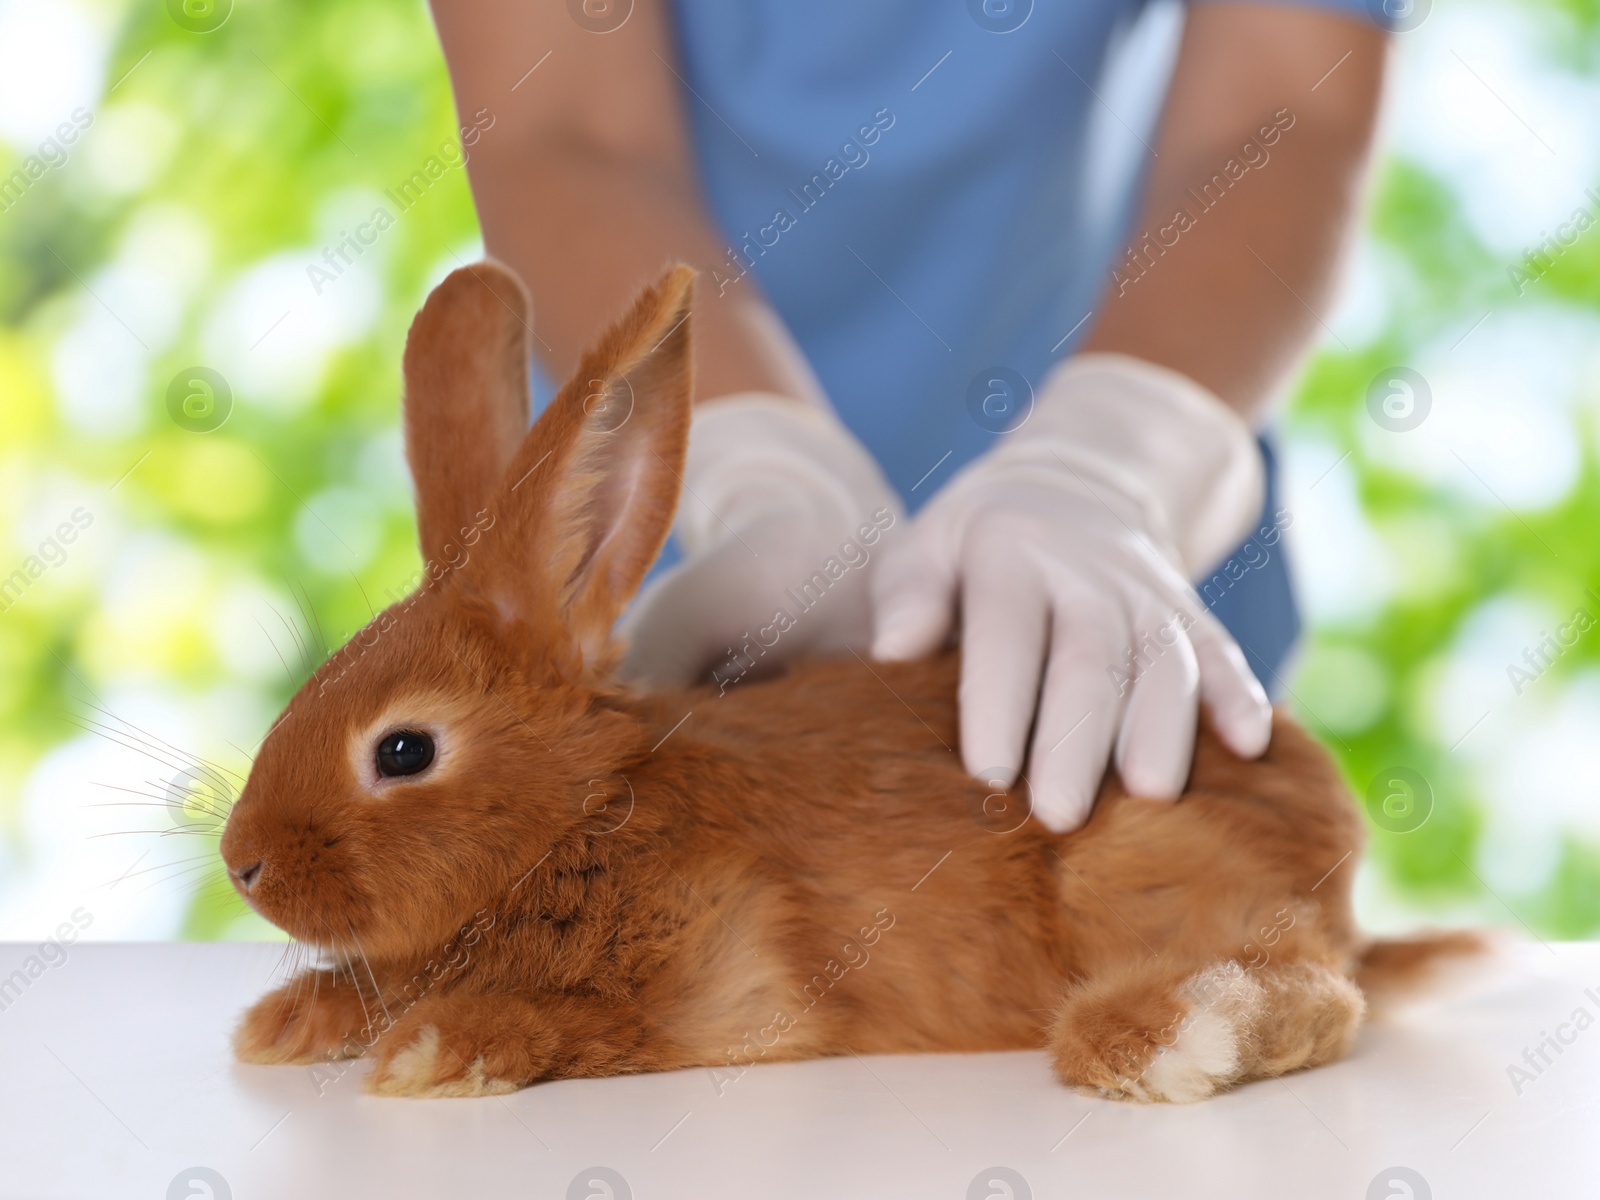 Image of Professional veterinarian examining bunny against blurred green background, closeup